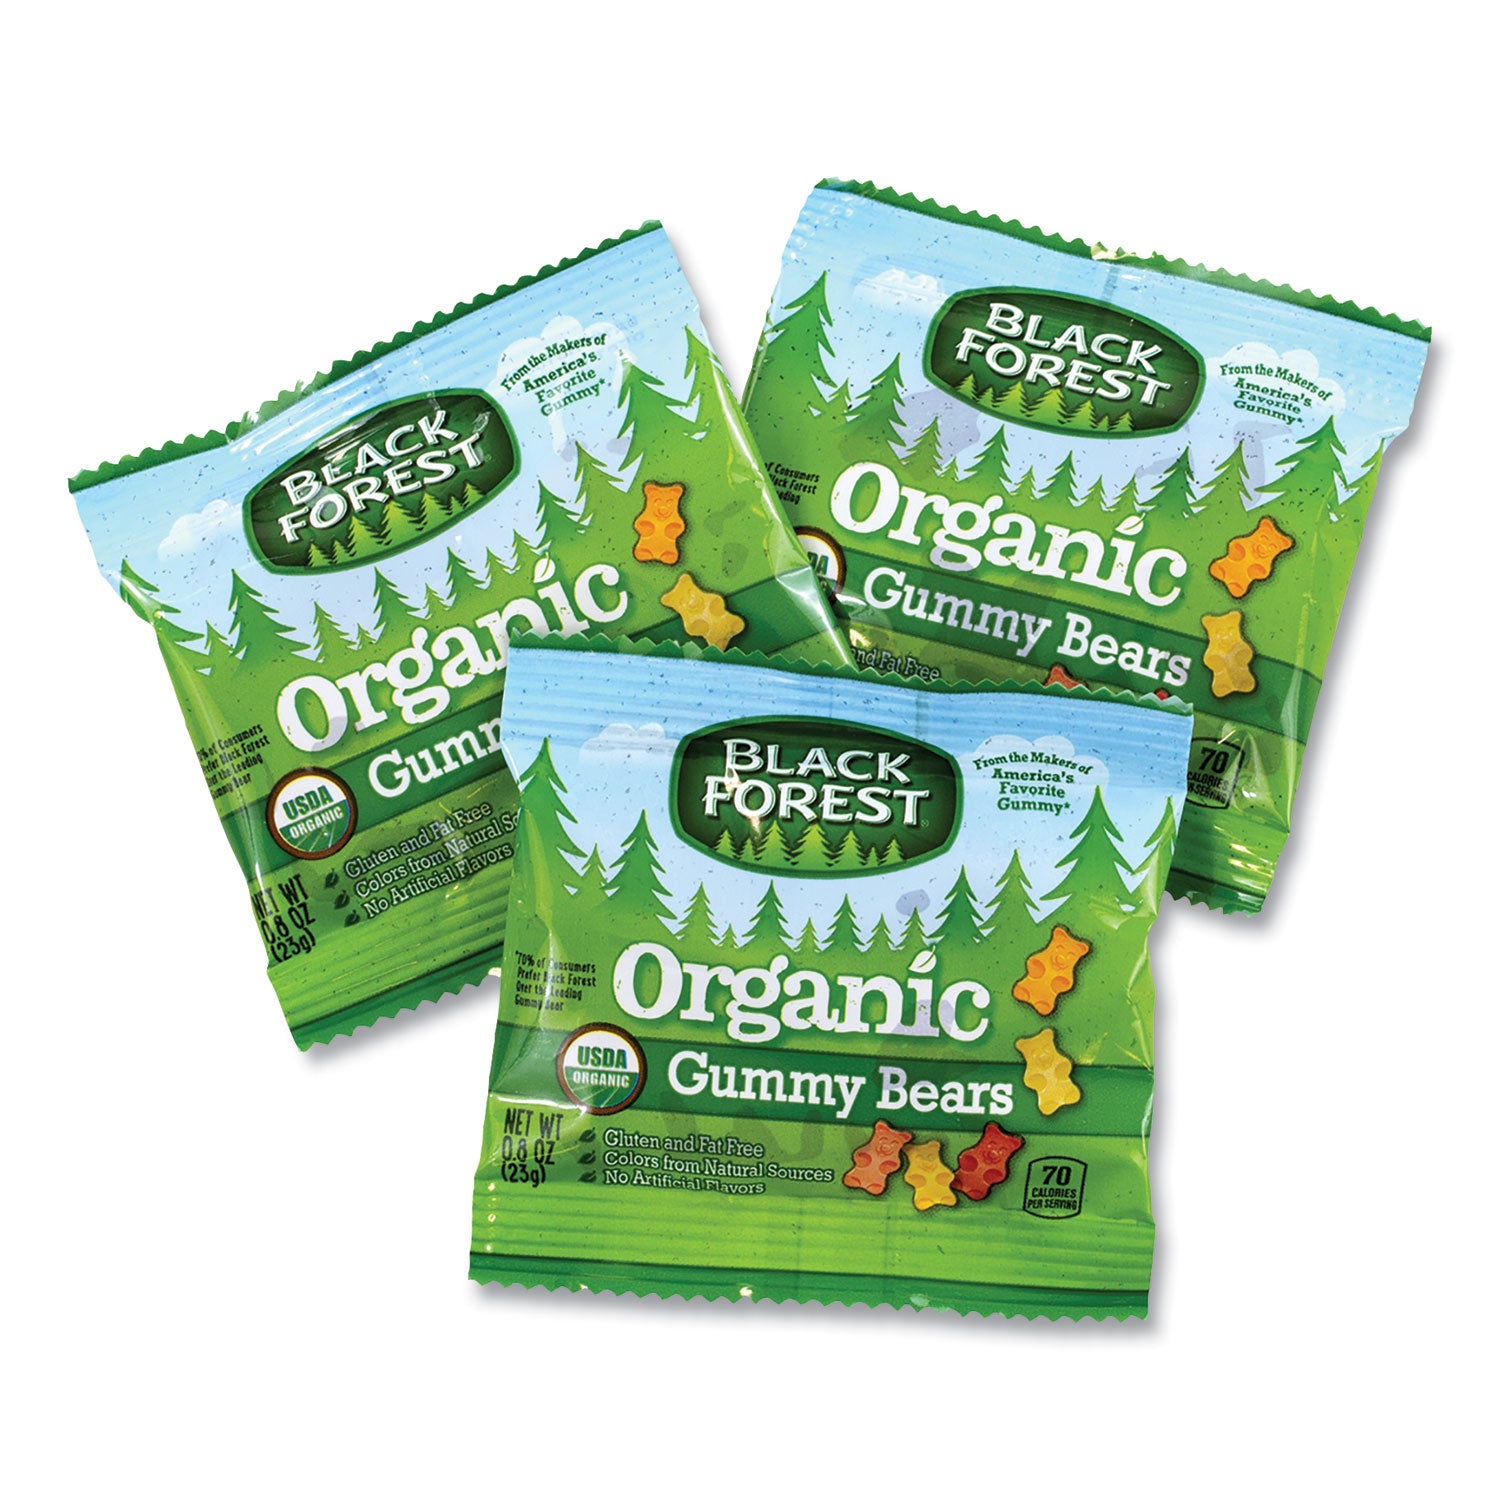 organic-gummy-bears-08-oz-pouch-65-pouches-carton-ships-in-1-3-business-days_grr22000556 - 2